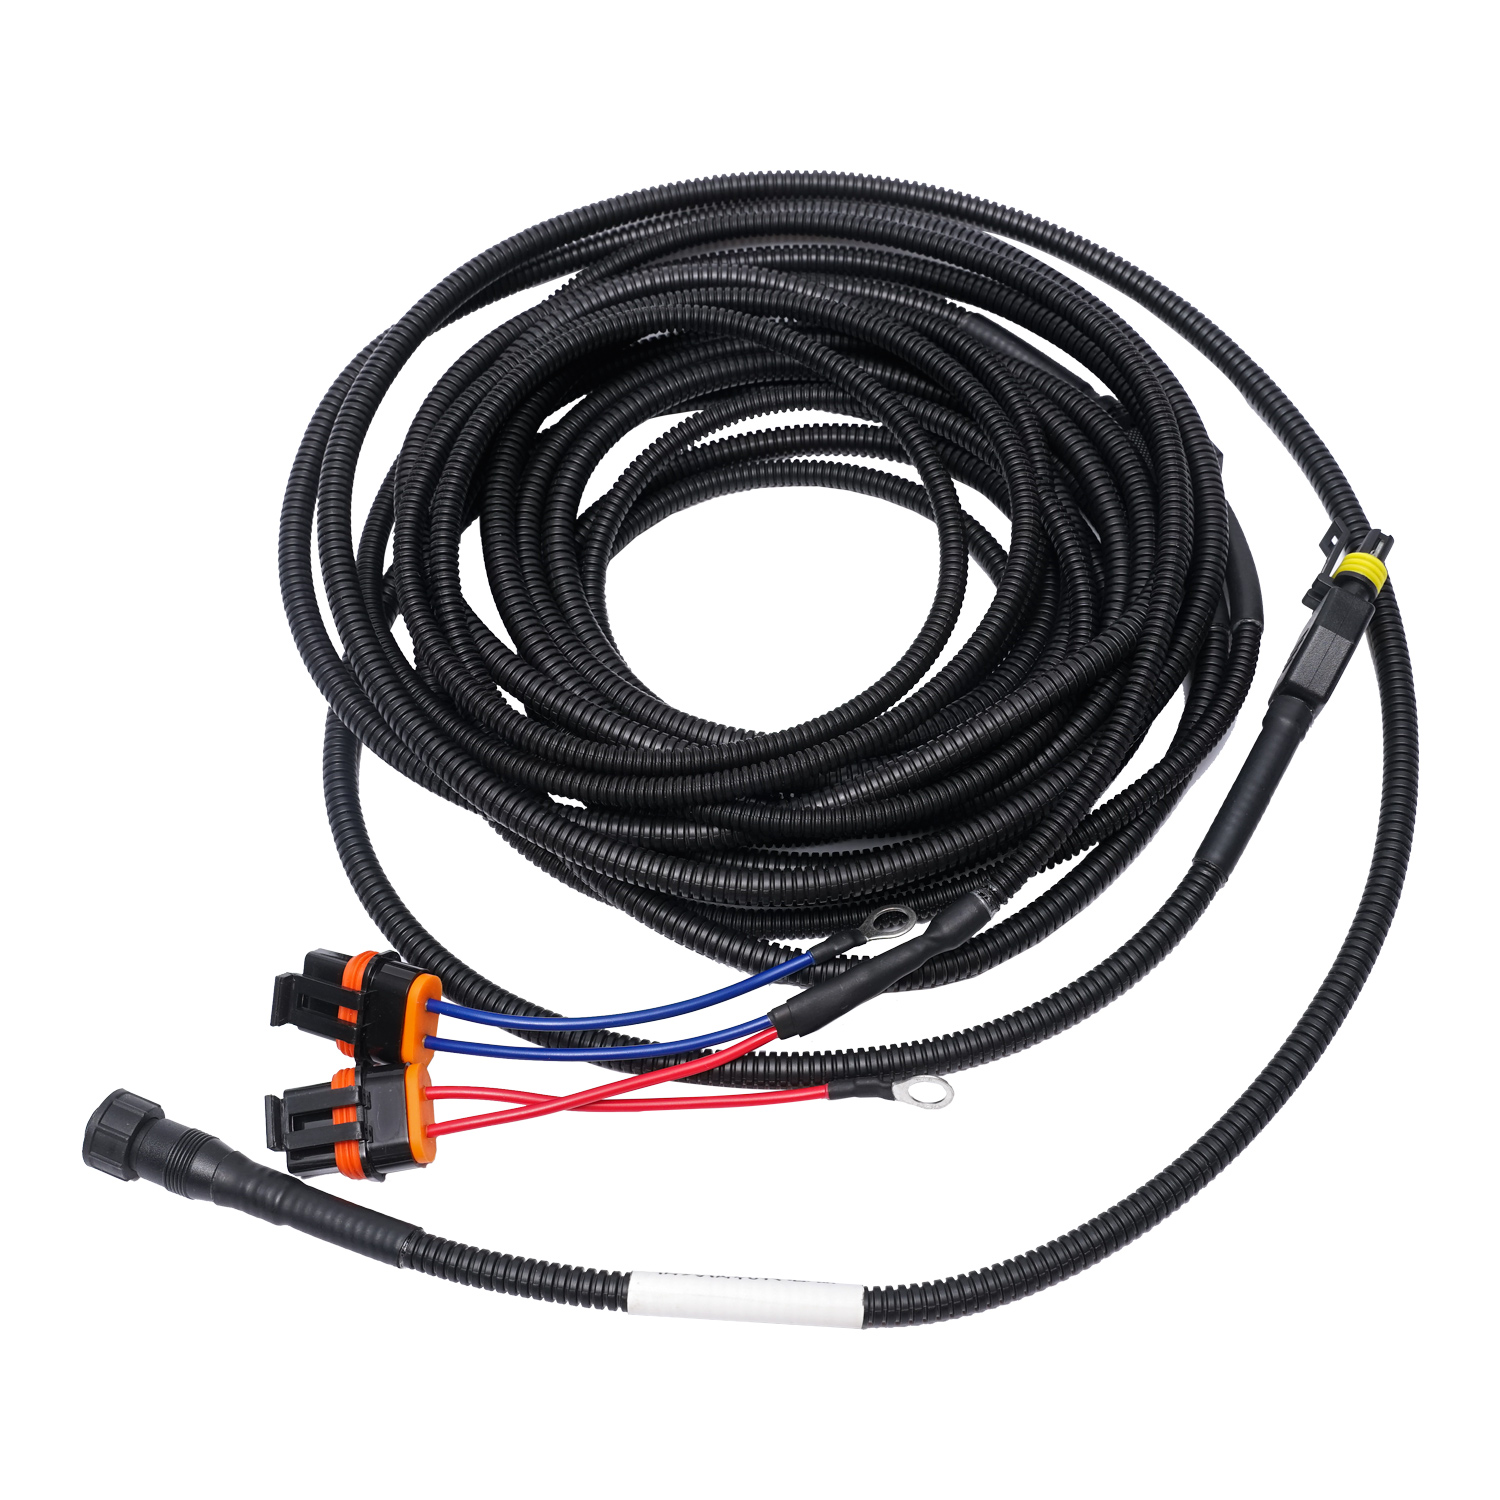 Ang PVC Pipe Waterproof Industrial Vehicle Automotive Wiring Harness